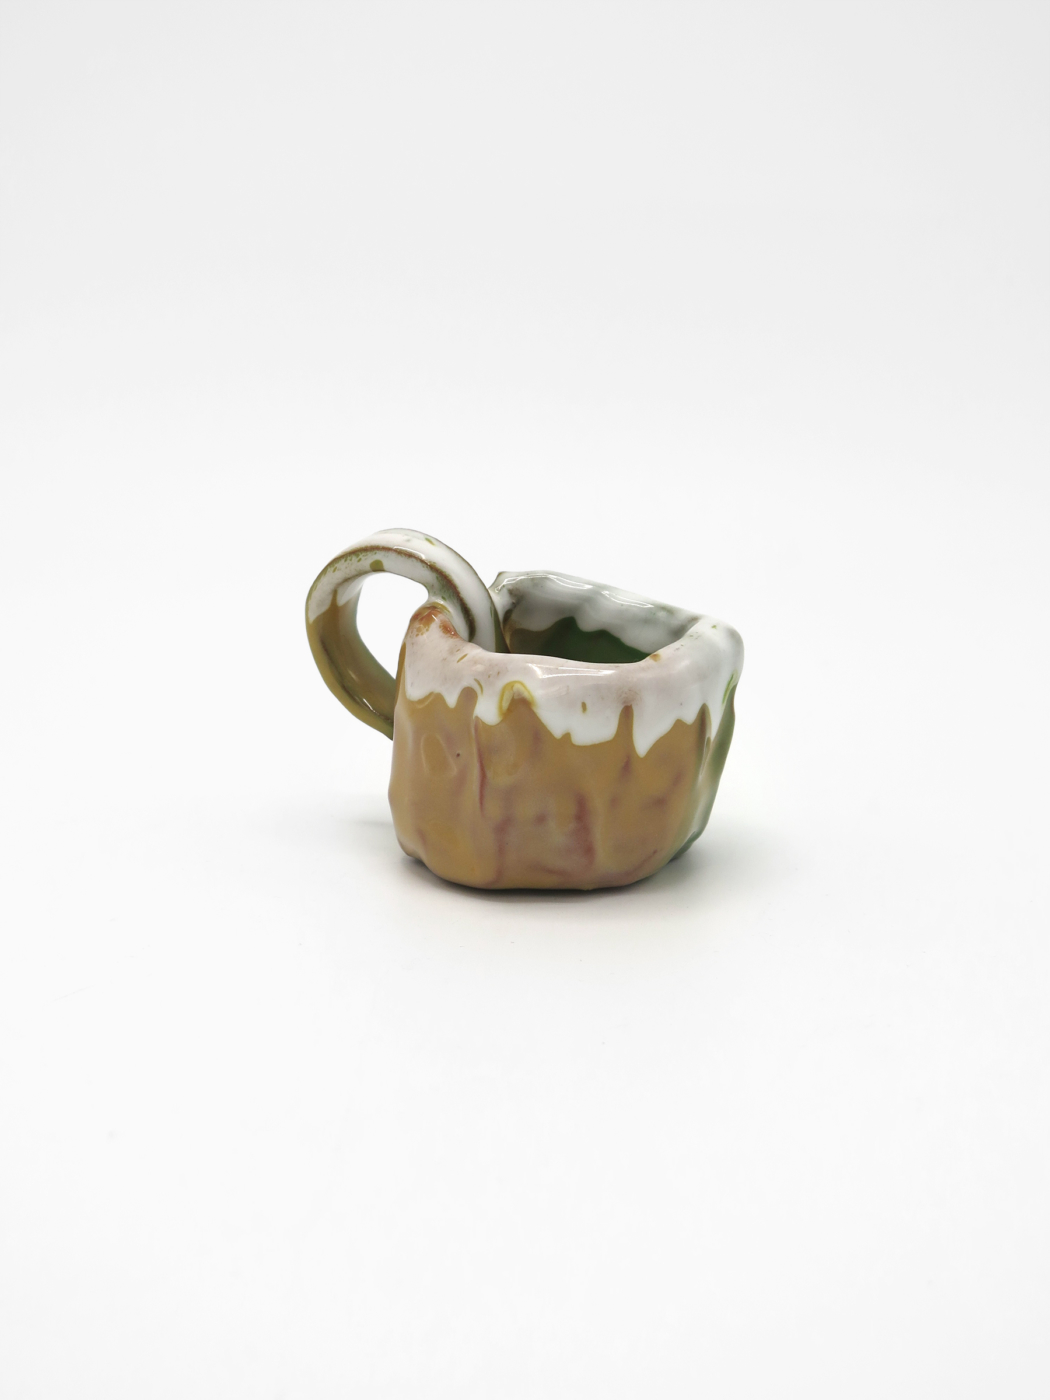 Peter Shire, Pinch pot (yellow and green)